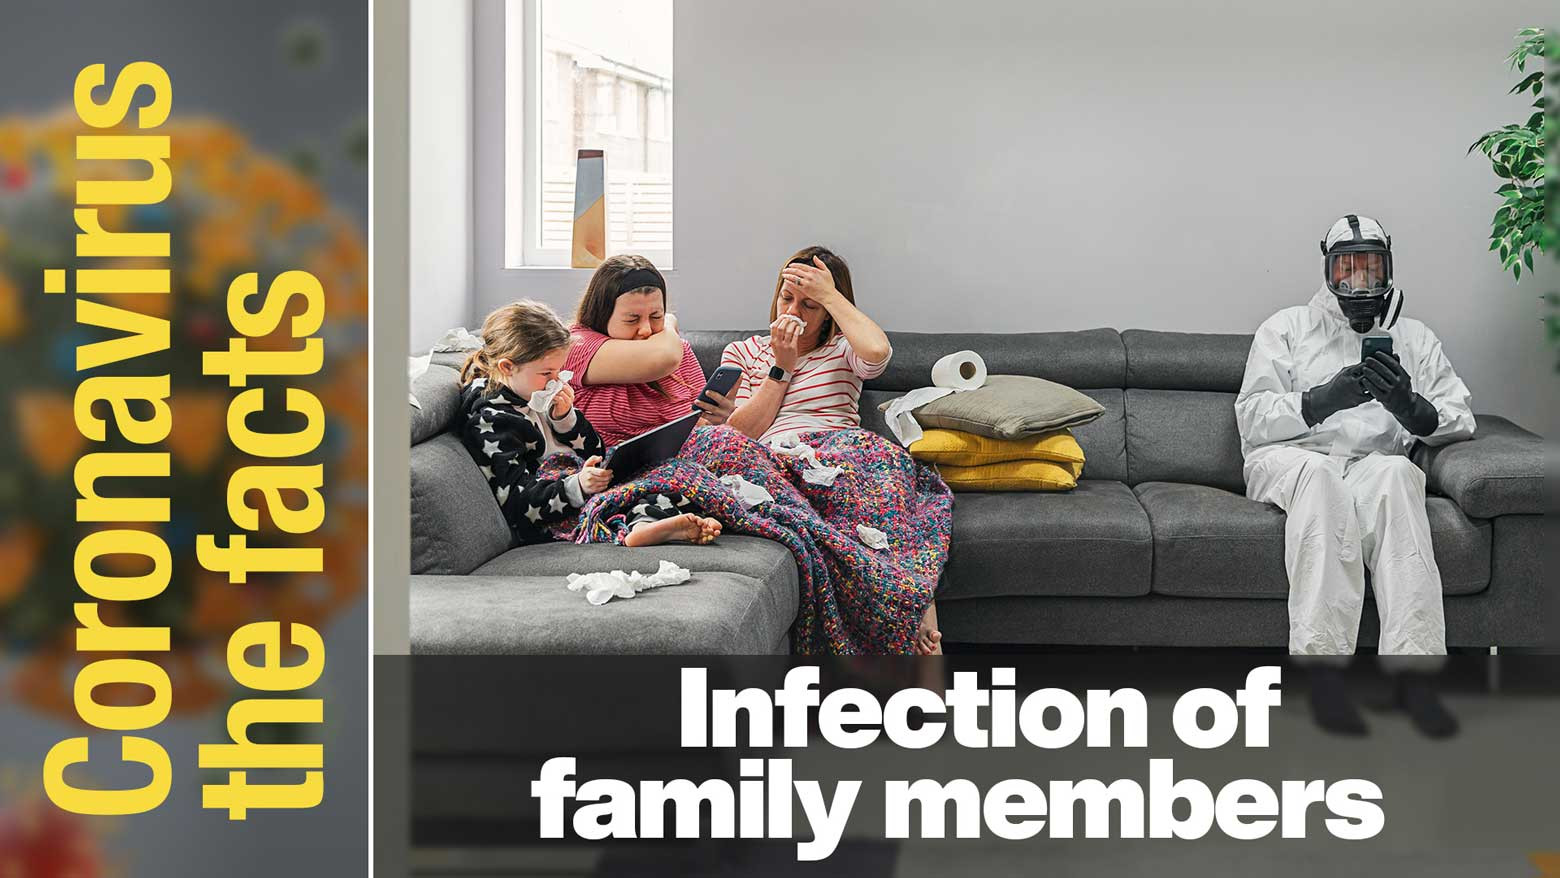 What to do if a family member is infected?